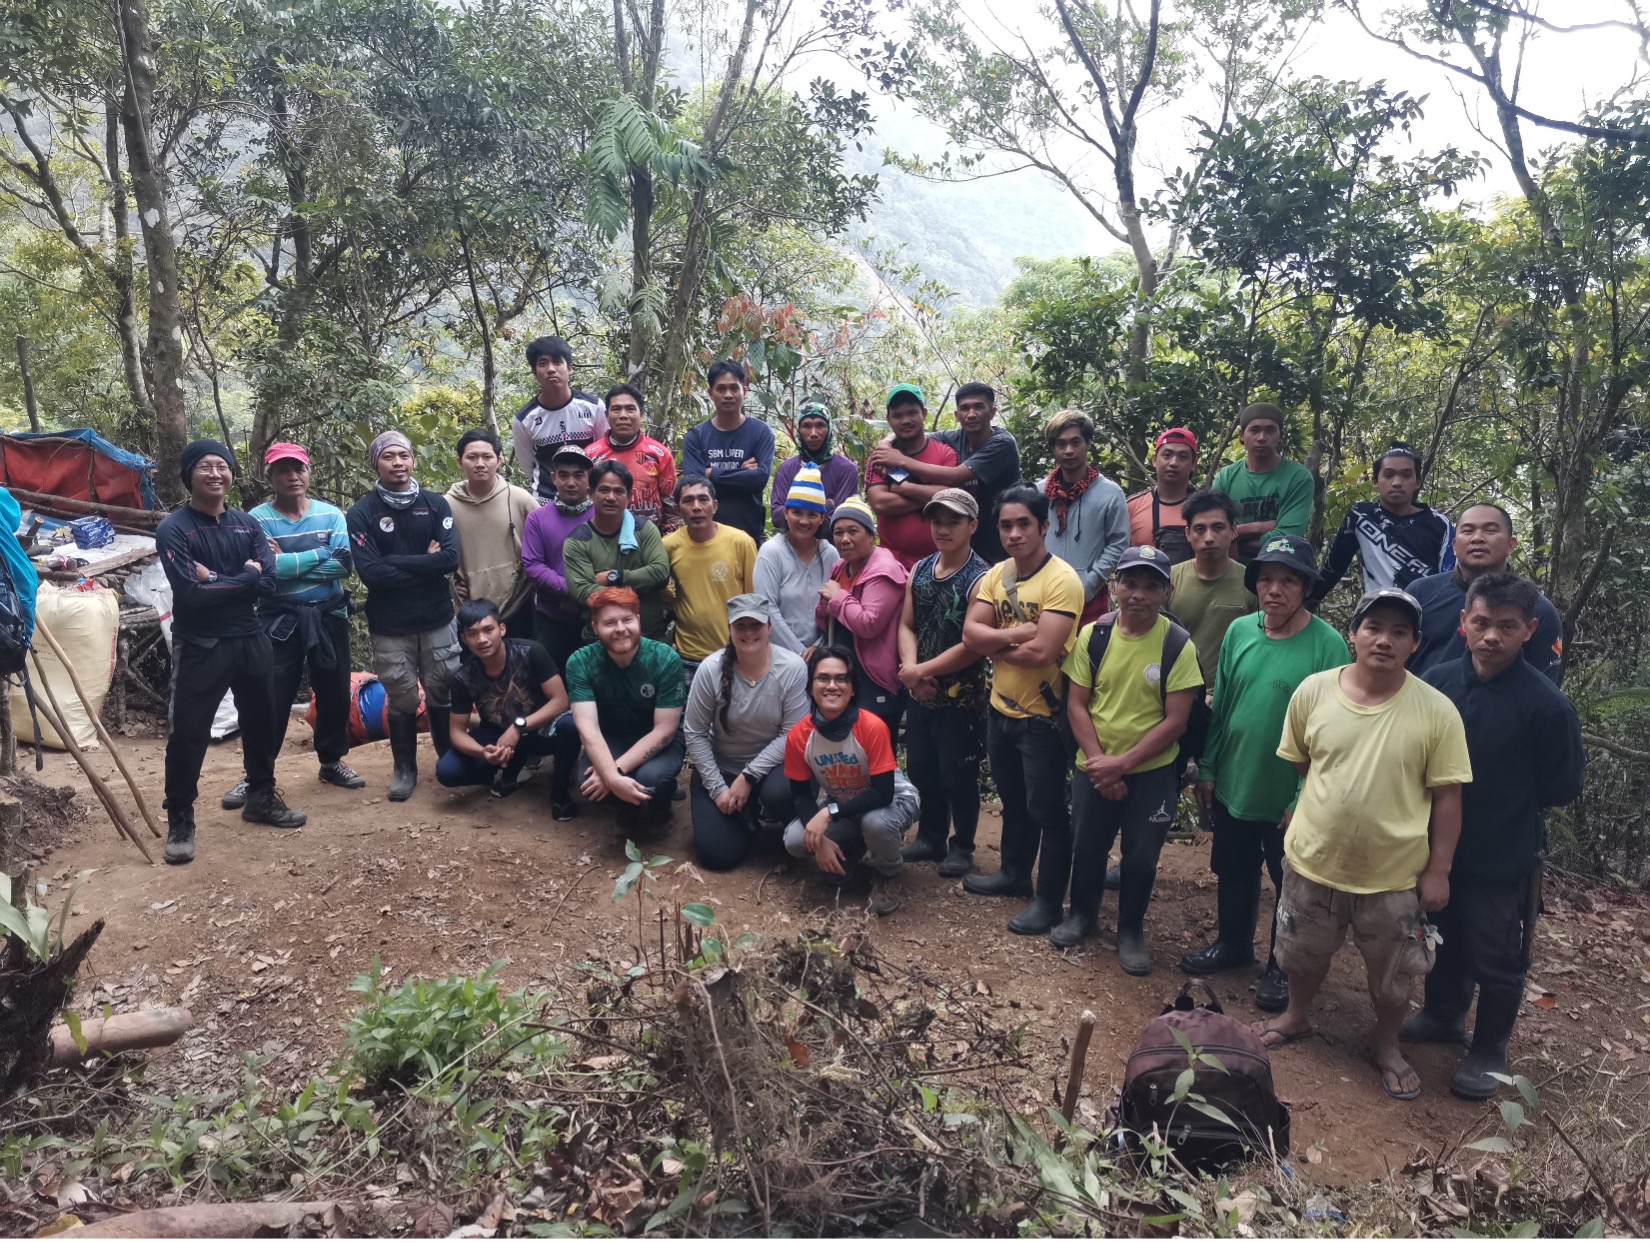 The team of UIC Center for the Recovery and Identification of the Missing investigators, colleagues from the National Museum of the Philippines, mountaineers and Kalanguya community members pose at a site on Mt. Timay-Ak. (Photo: Gregg Abbang/National Museum of the Philippines)